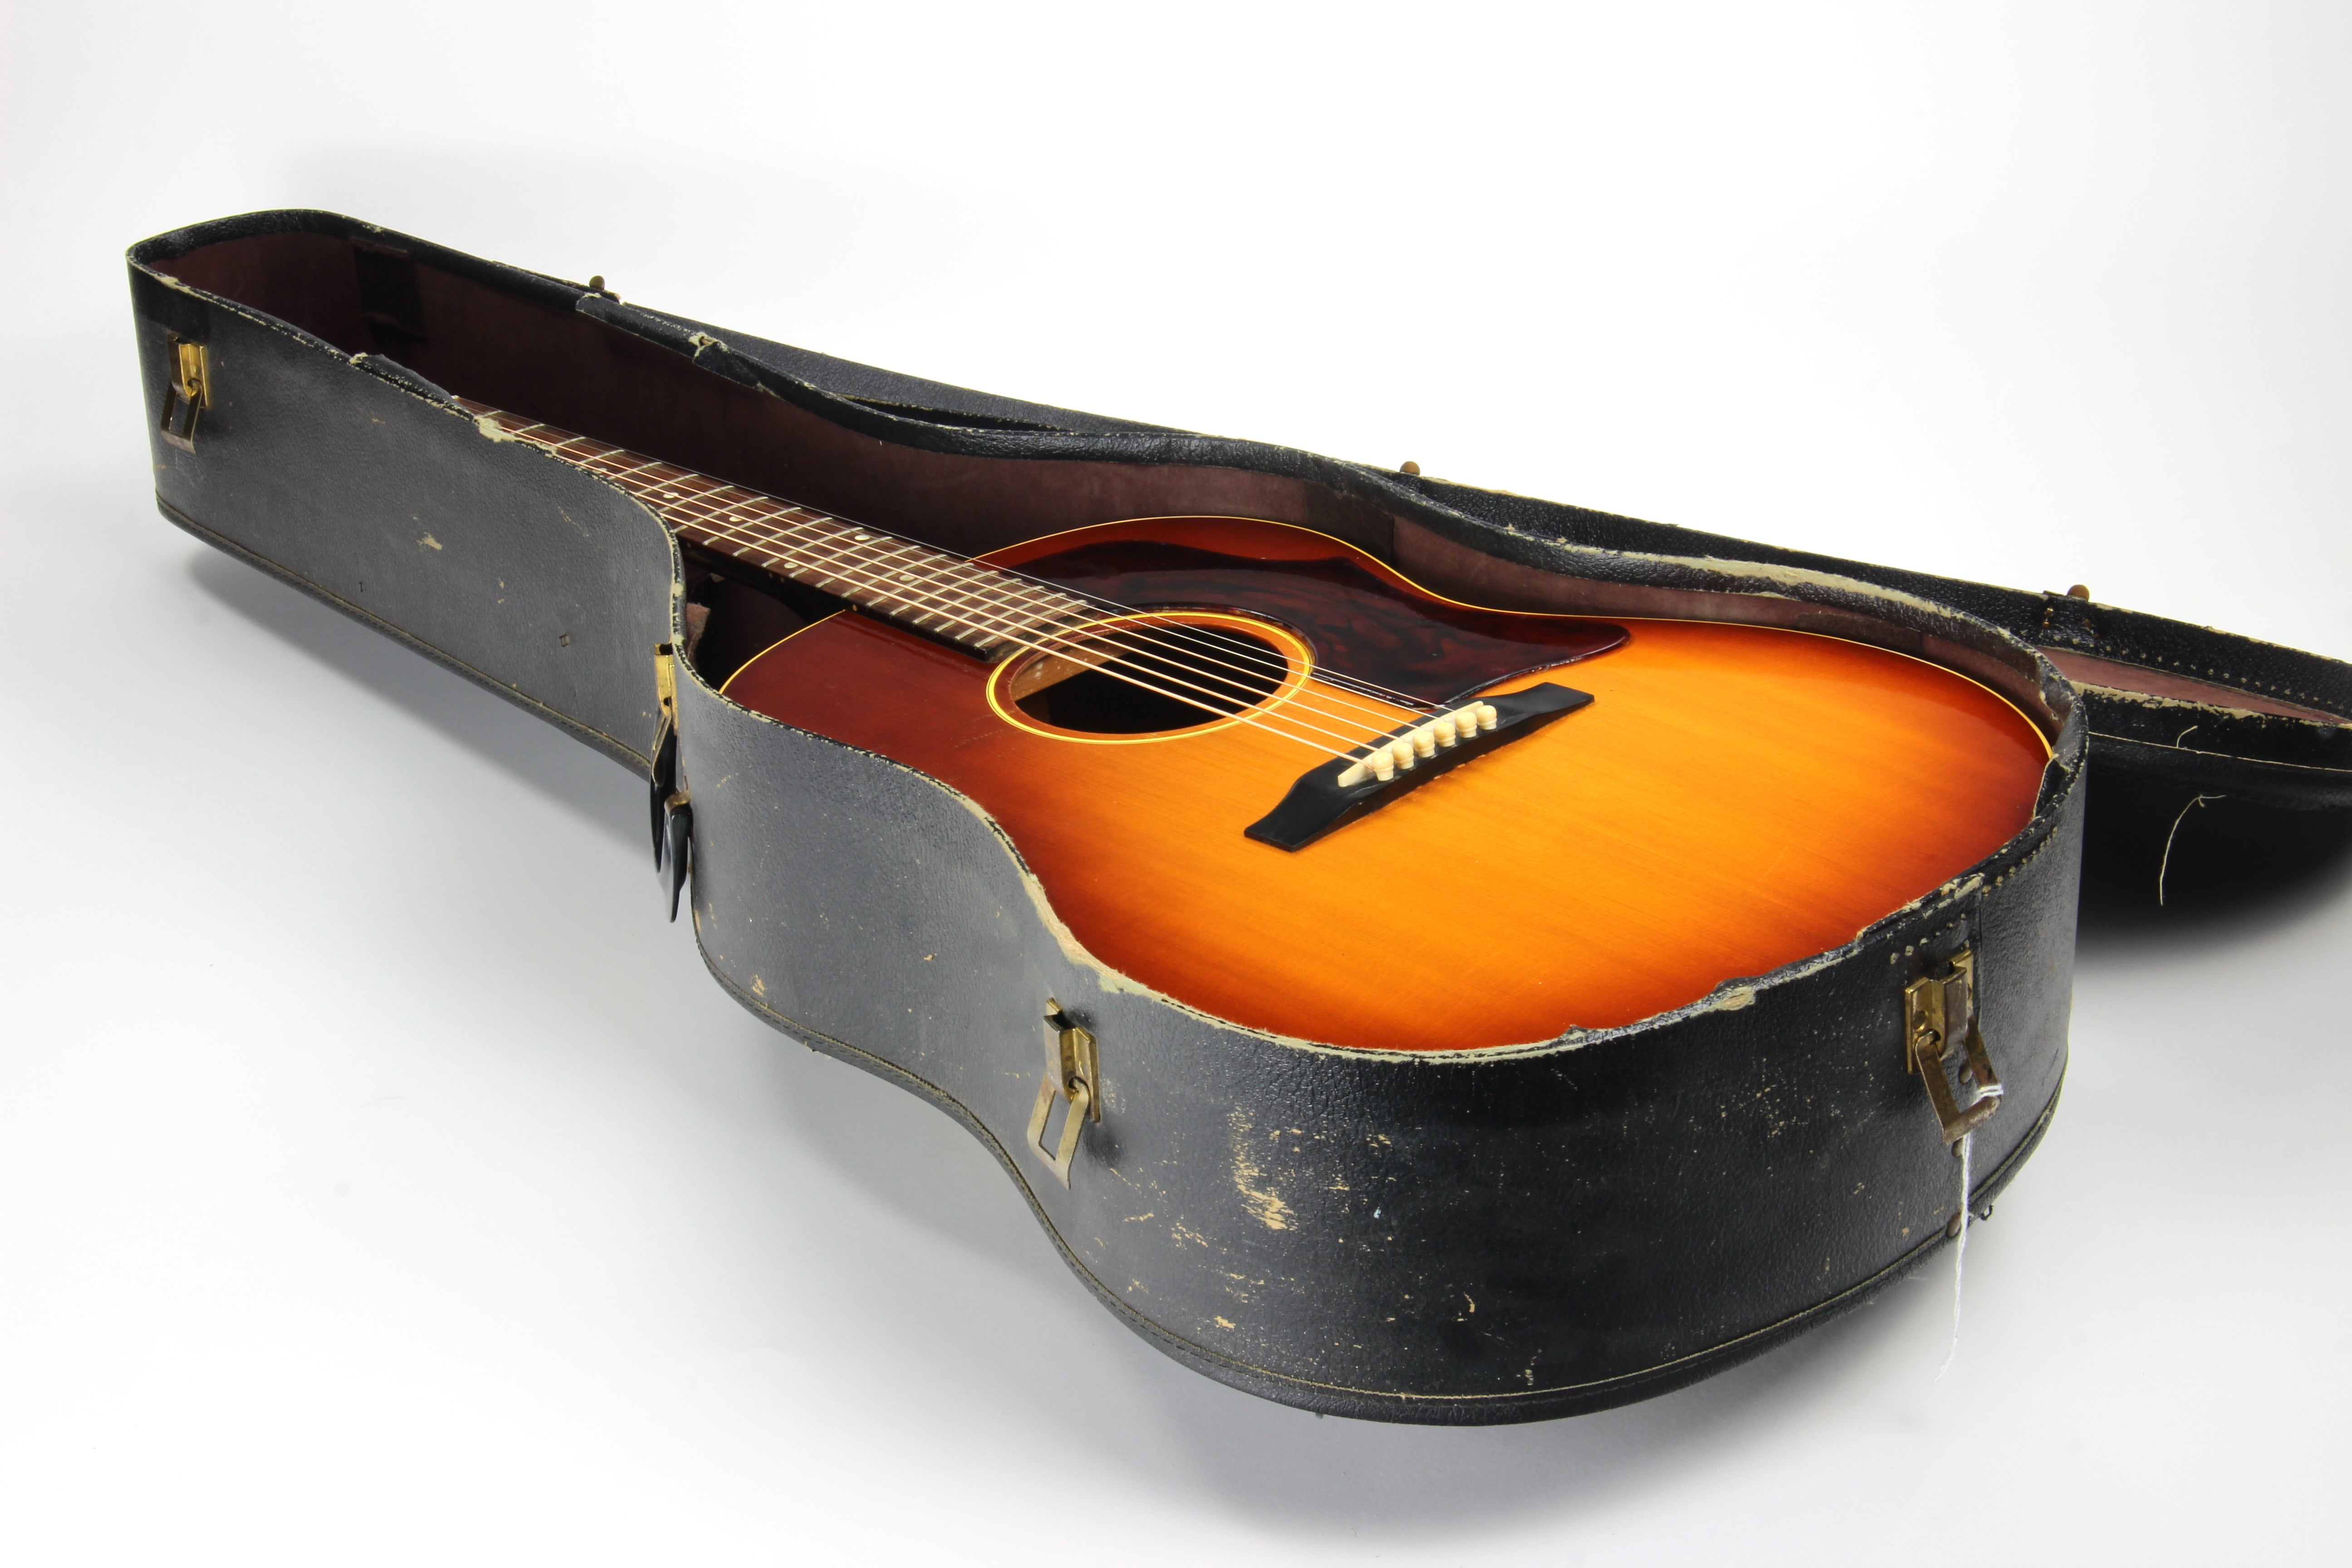 *SOLD*  1965 Gibson LG-1 Sunburst Small Body Acoustic Flat Top - No Cracks! - Wide Nut 1-11/16